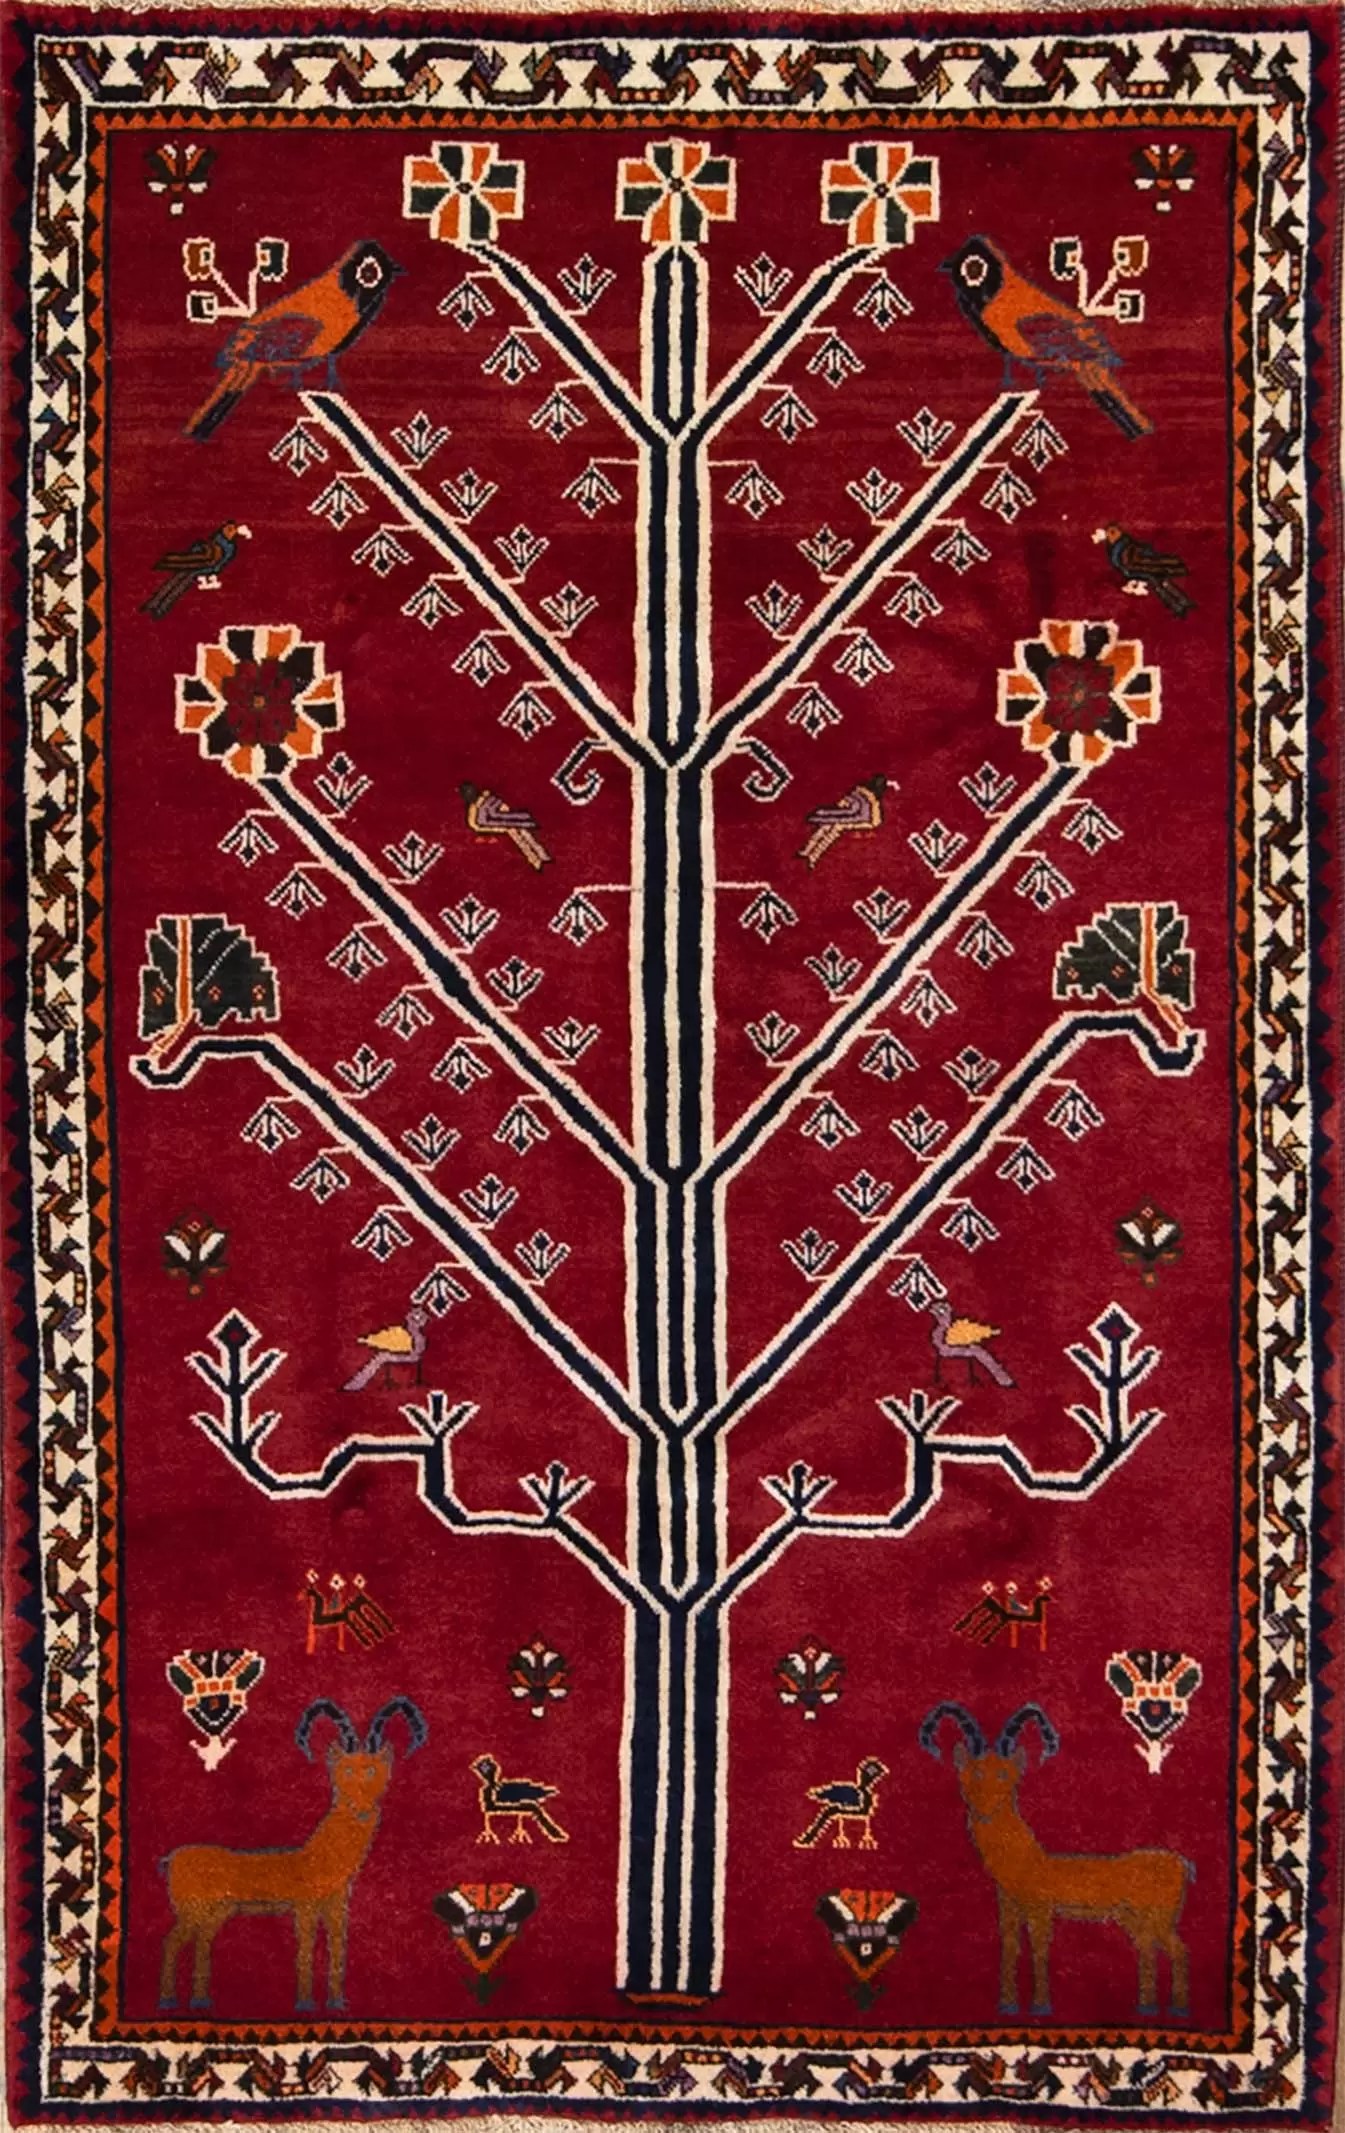 Tribal rug, hand knotted tree of life Persian Shiraz wool rug in red color. Size 3.9x6.